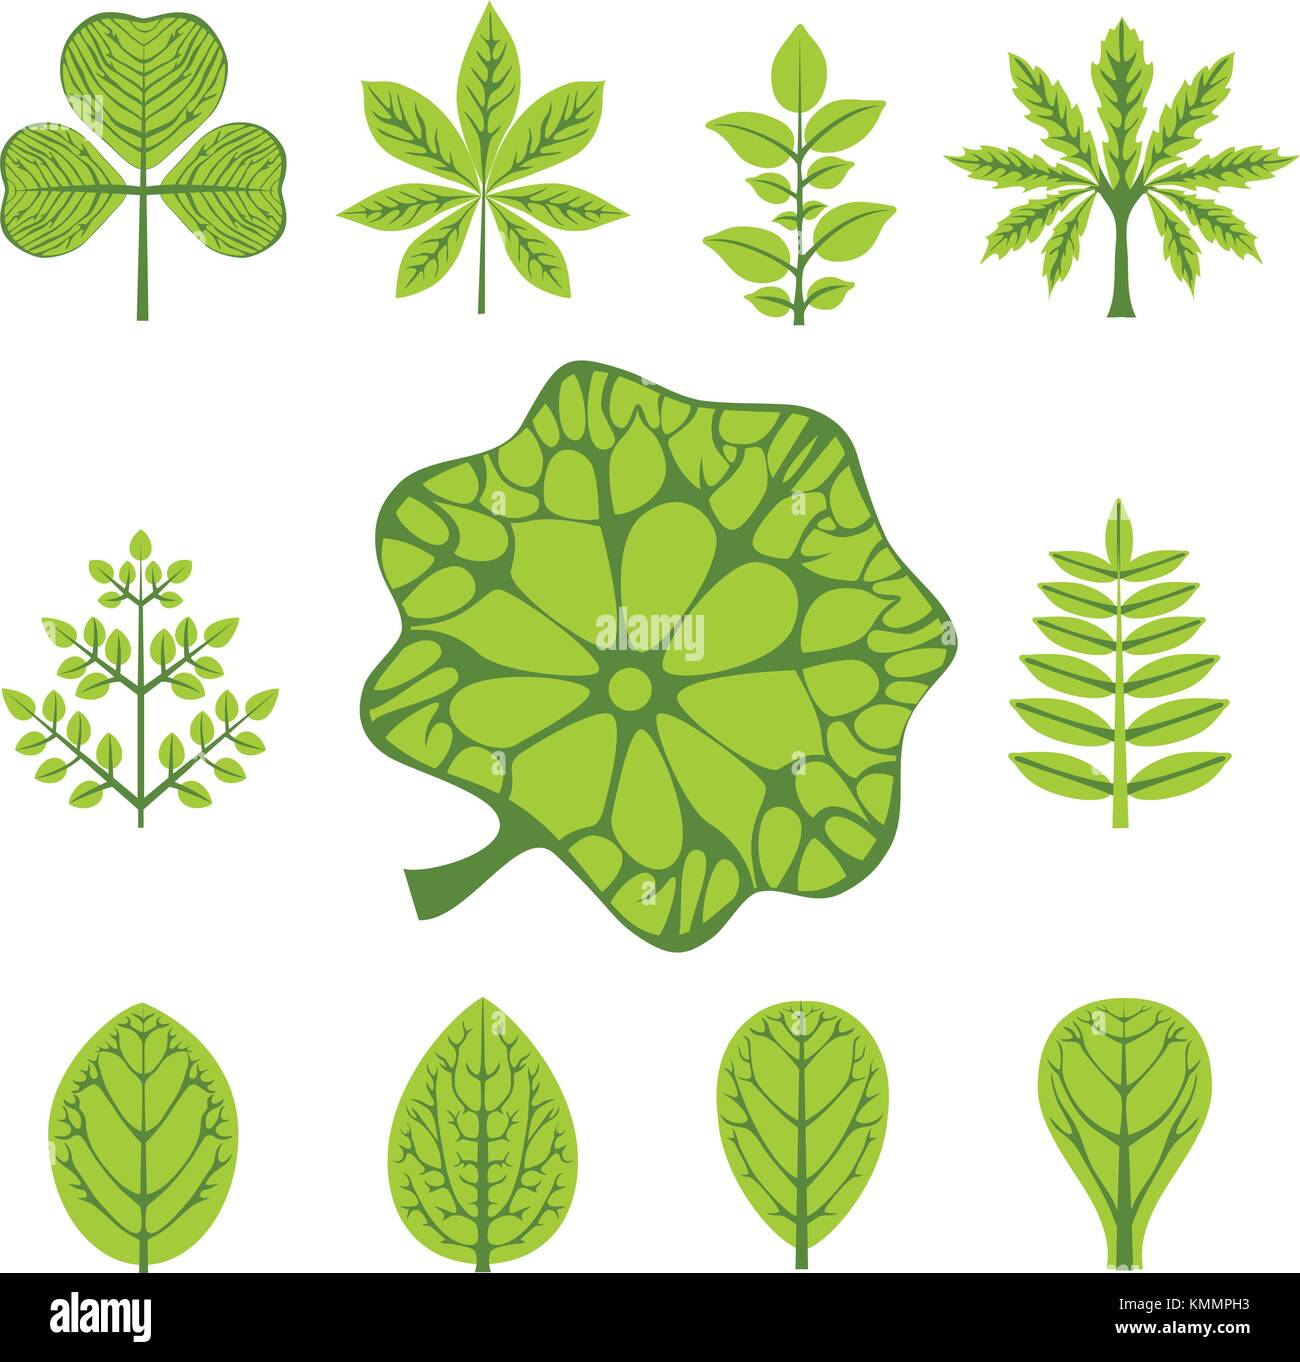 10,335 Plant Sketch Name Images, Stock Photos, 3D objects, & Vectors |  Shutterstock